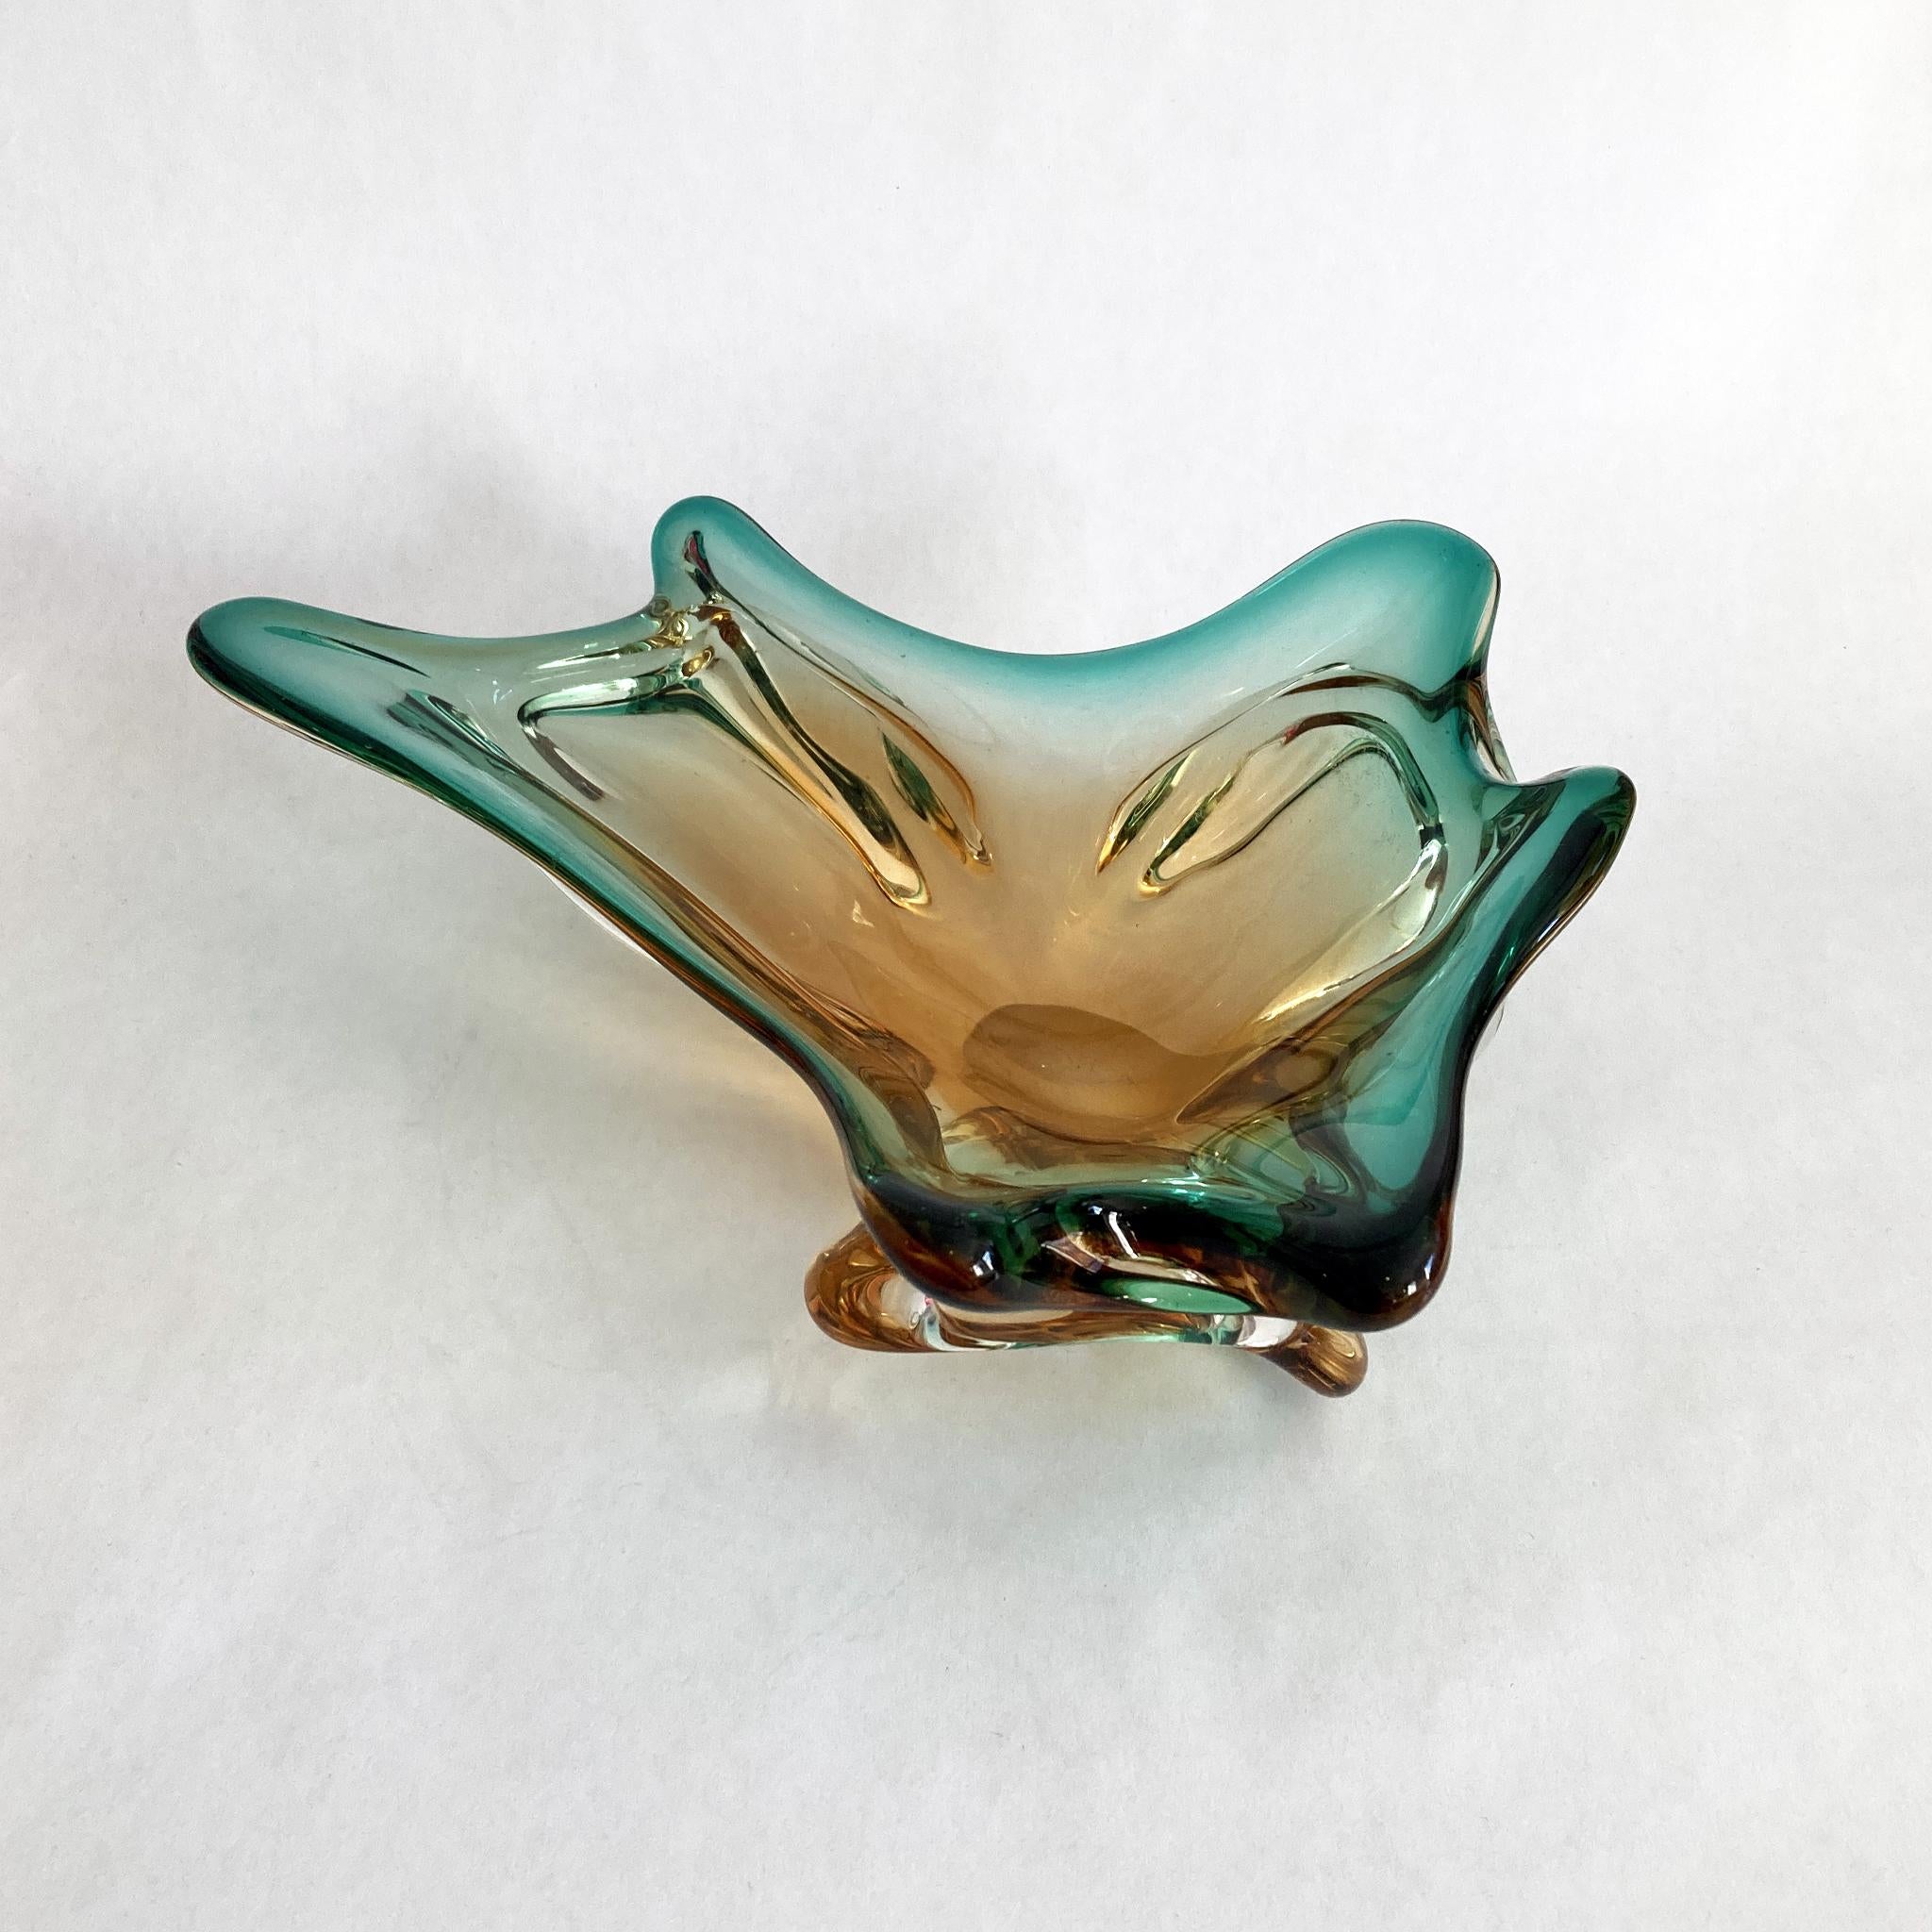 Hand-Crafted Murano Blown Glass Centerpiece Bowl in Green and Amber, 1970s